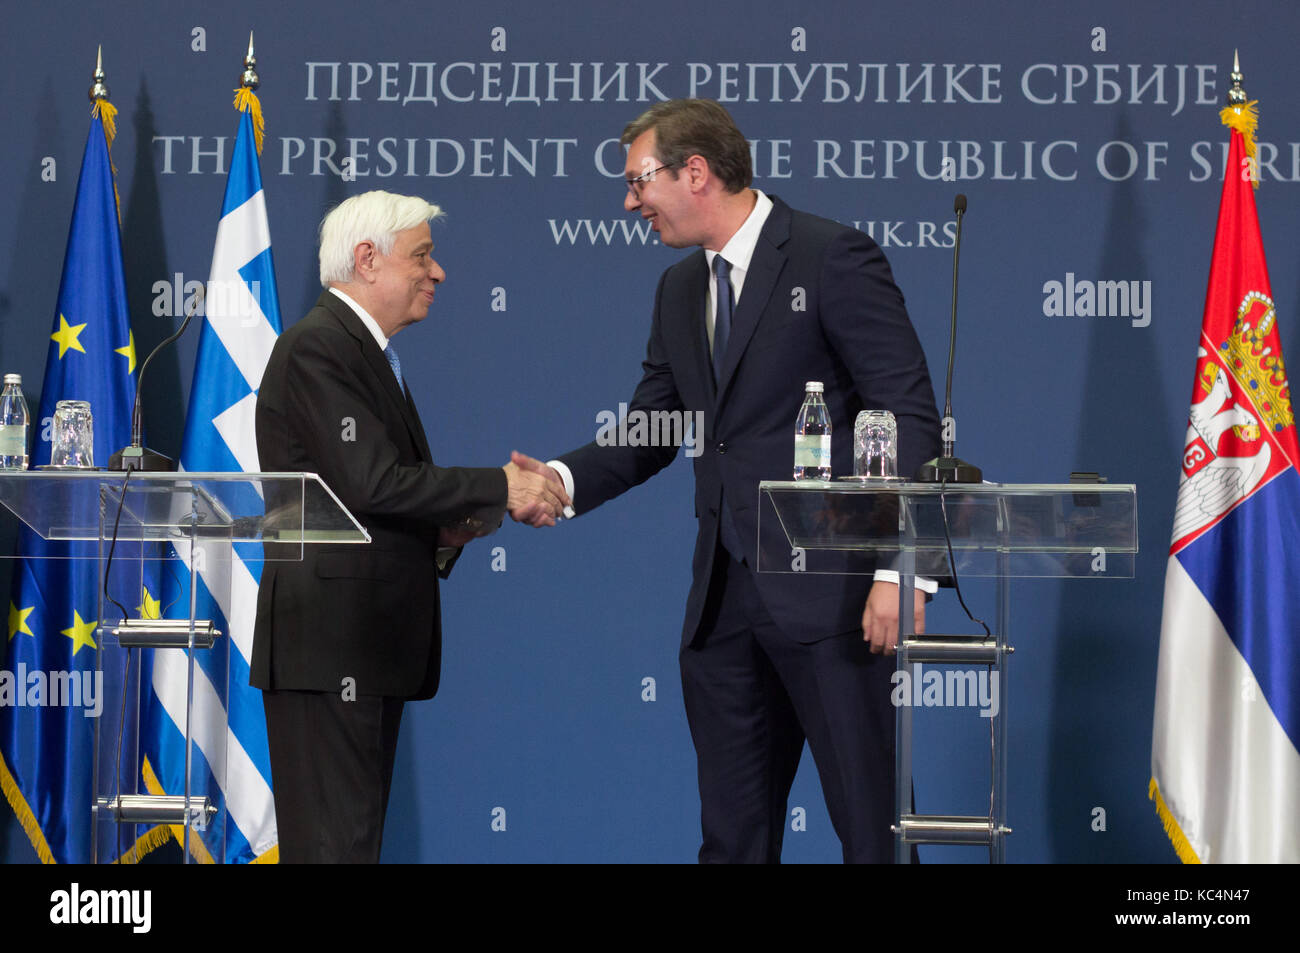 (171002) -- BELGRADE, Oct. 2, 2017 (Xinhua) -- Visiting Greek President Prokopis Pavlopoulos (L) shakes hands with his Serbian counterpart Aleksandar Vucic at a joint press conference in Belgrade, Serbia, Oct. 2, 2017. Greece will support Serbia as well as all other Balkan countries who wish to become part of the European Union (EU), but these countries must respect international right, as well as European principles and heritage, said Greek President Prokopis Pavlopoulos during his visit to Serbia on Monday. (Xinhua/Nemanja Cabric) Stock Photo